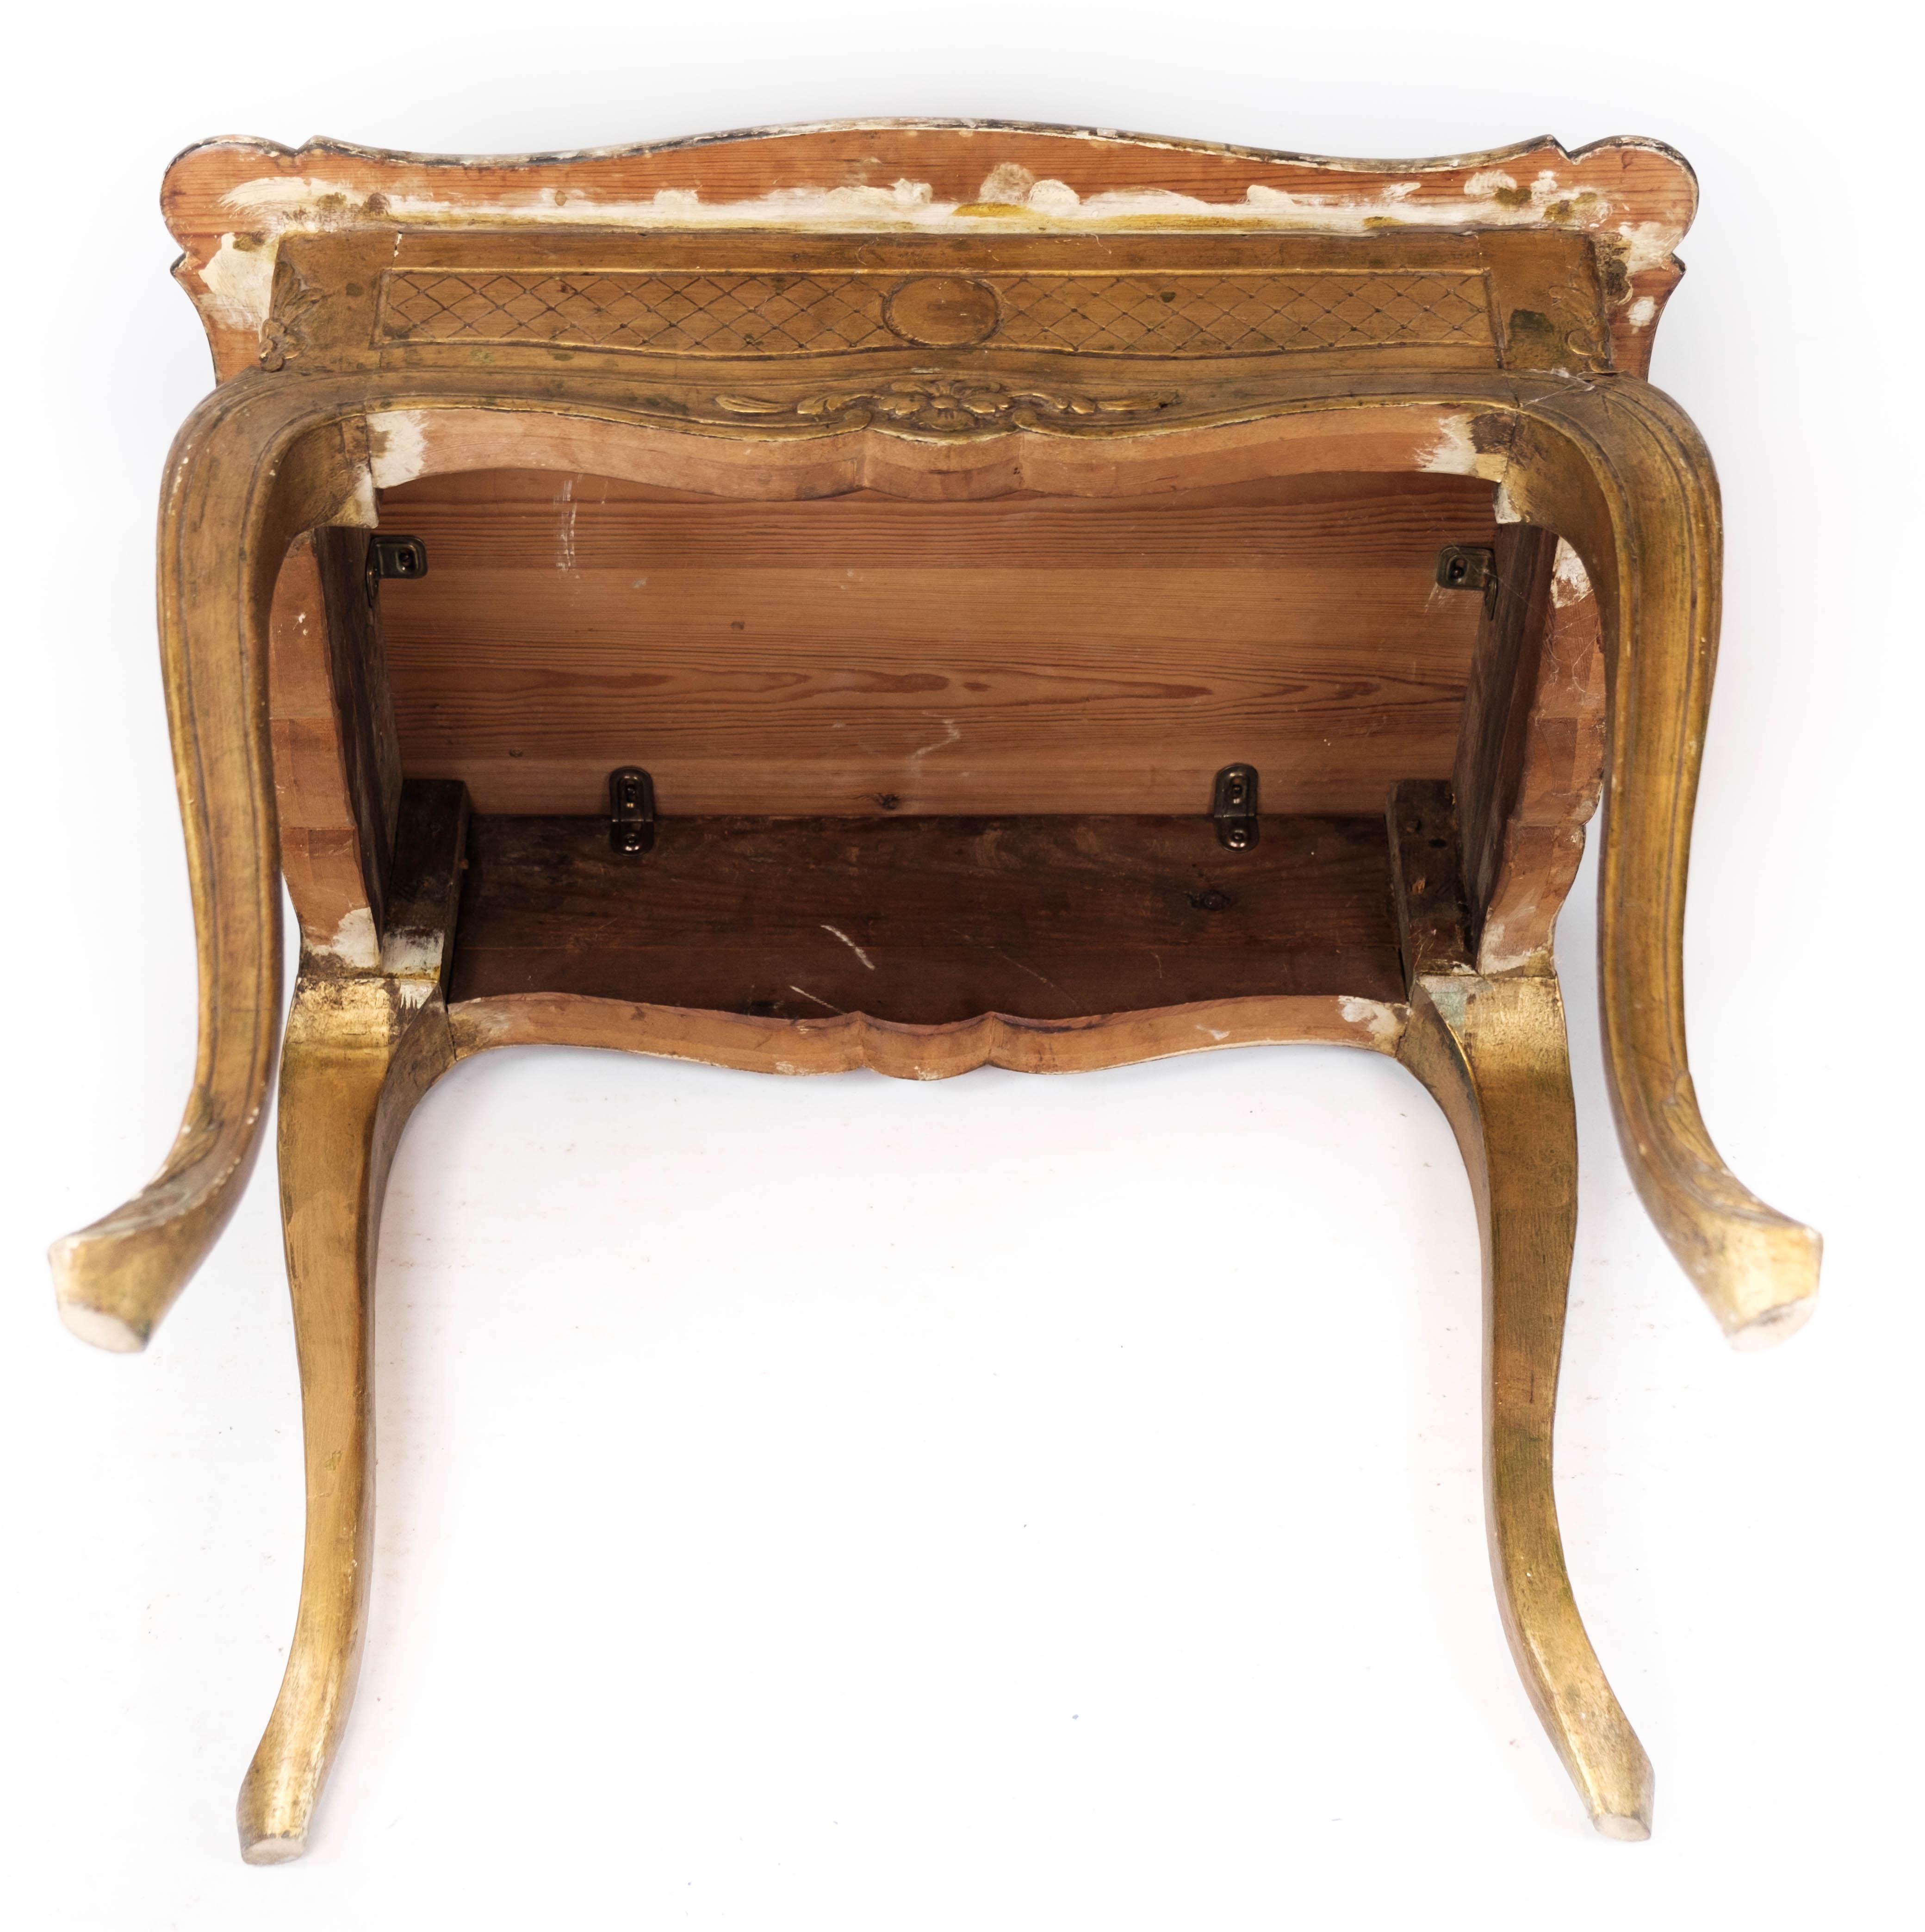 Rococo Revival Side Table with Marbled Tabletop and Frame of Gilded Wood, 1860s For Sale 5